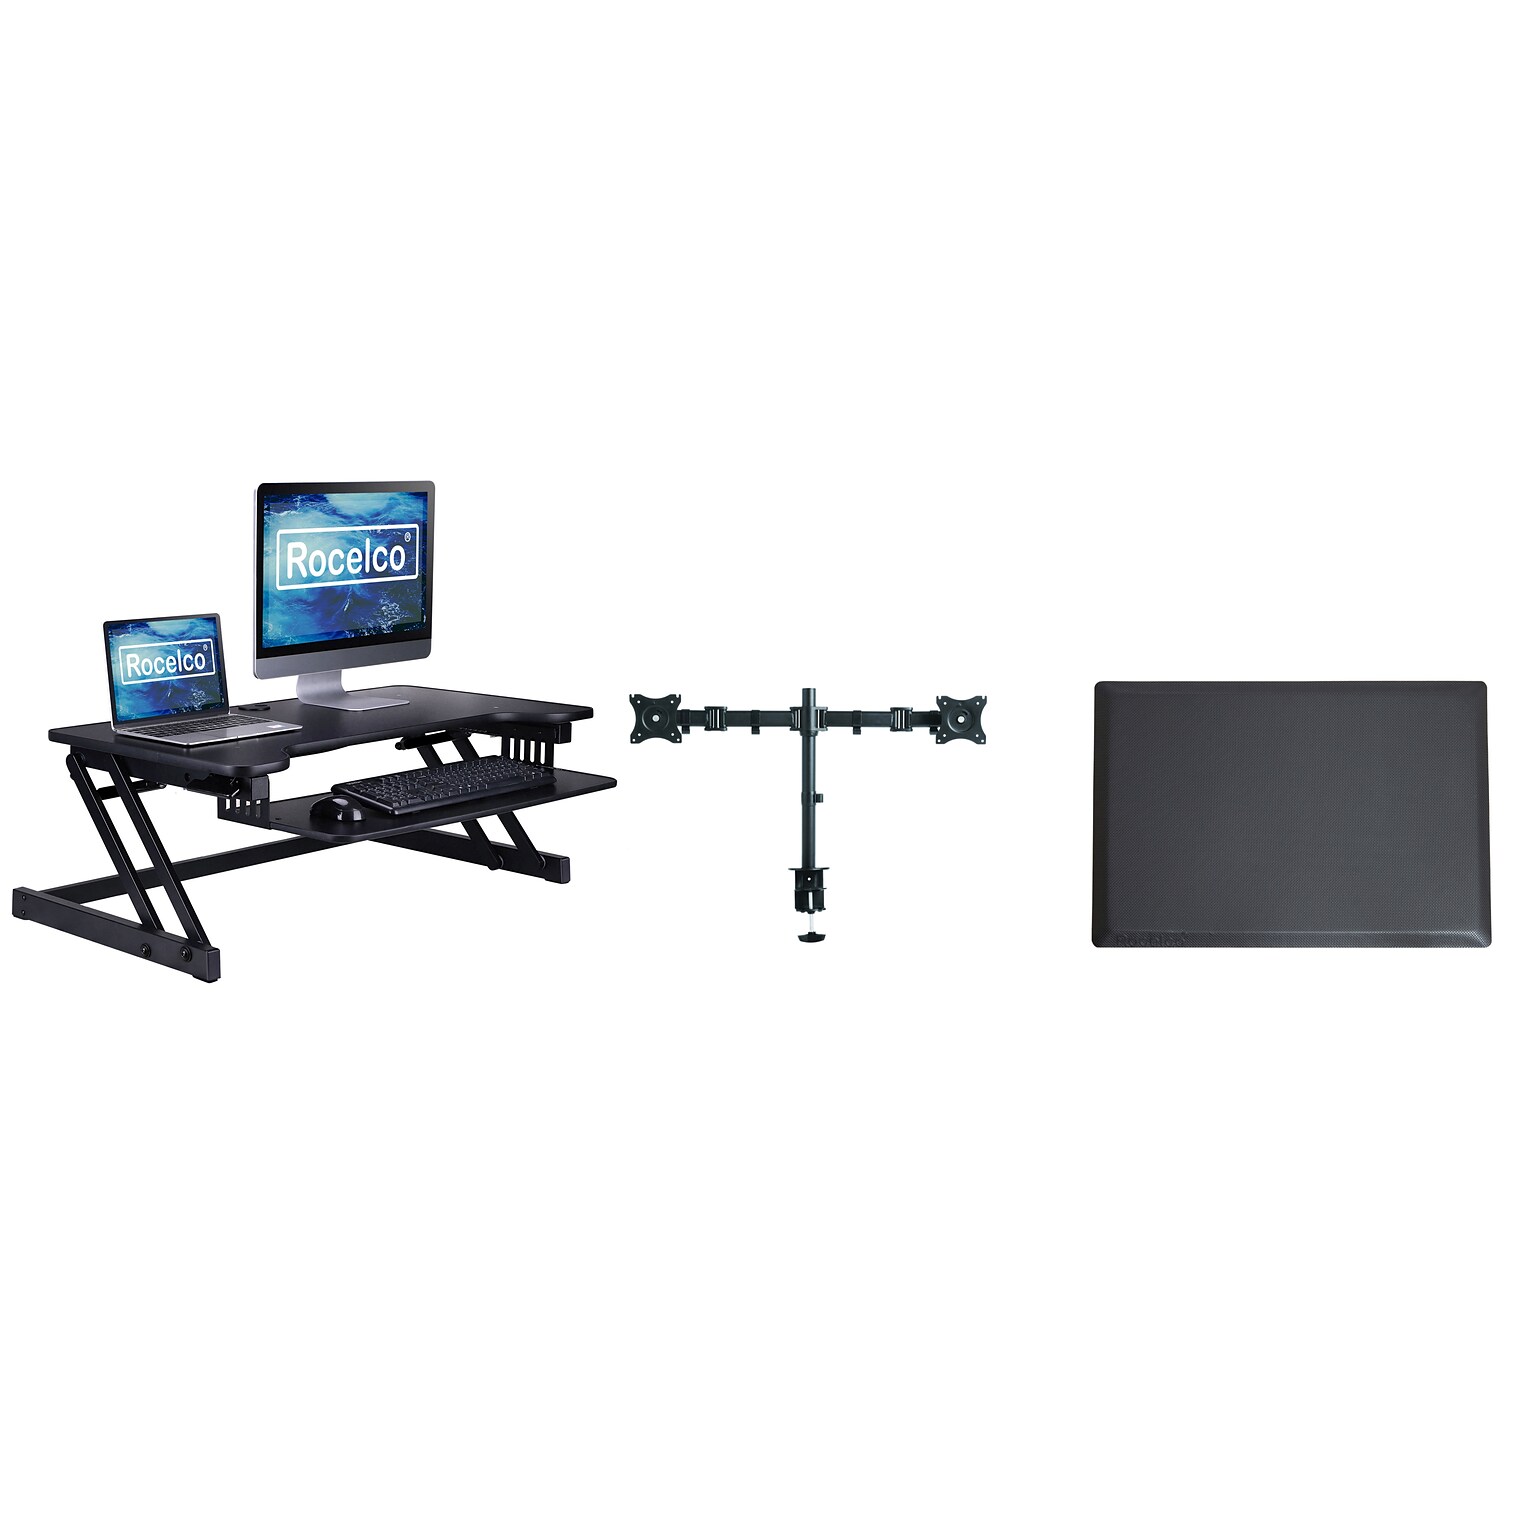 Rocelco 37.5 Height Adjustable Standing Desk Converter with Dual Monitor Arm - Anti Fatigue Mat, Black (R DADRB-DM2-MAF)